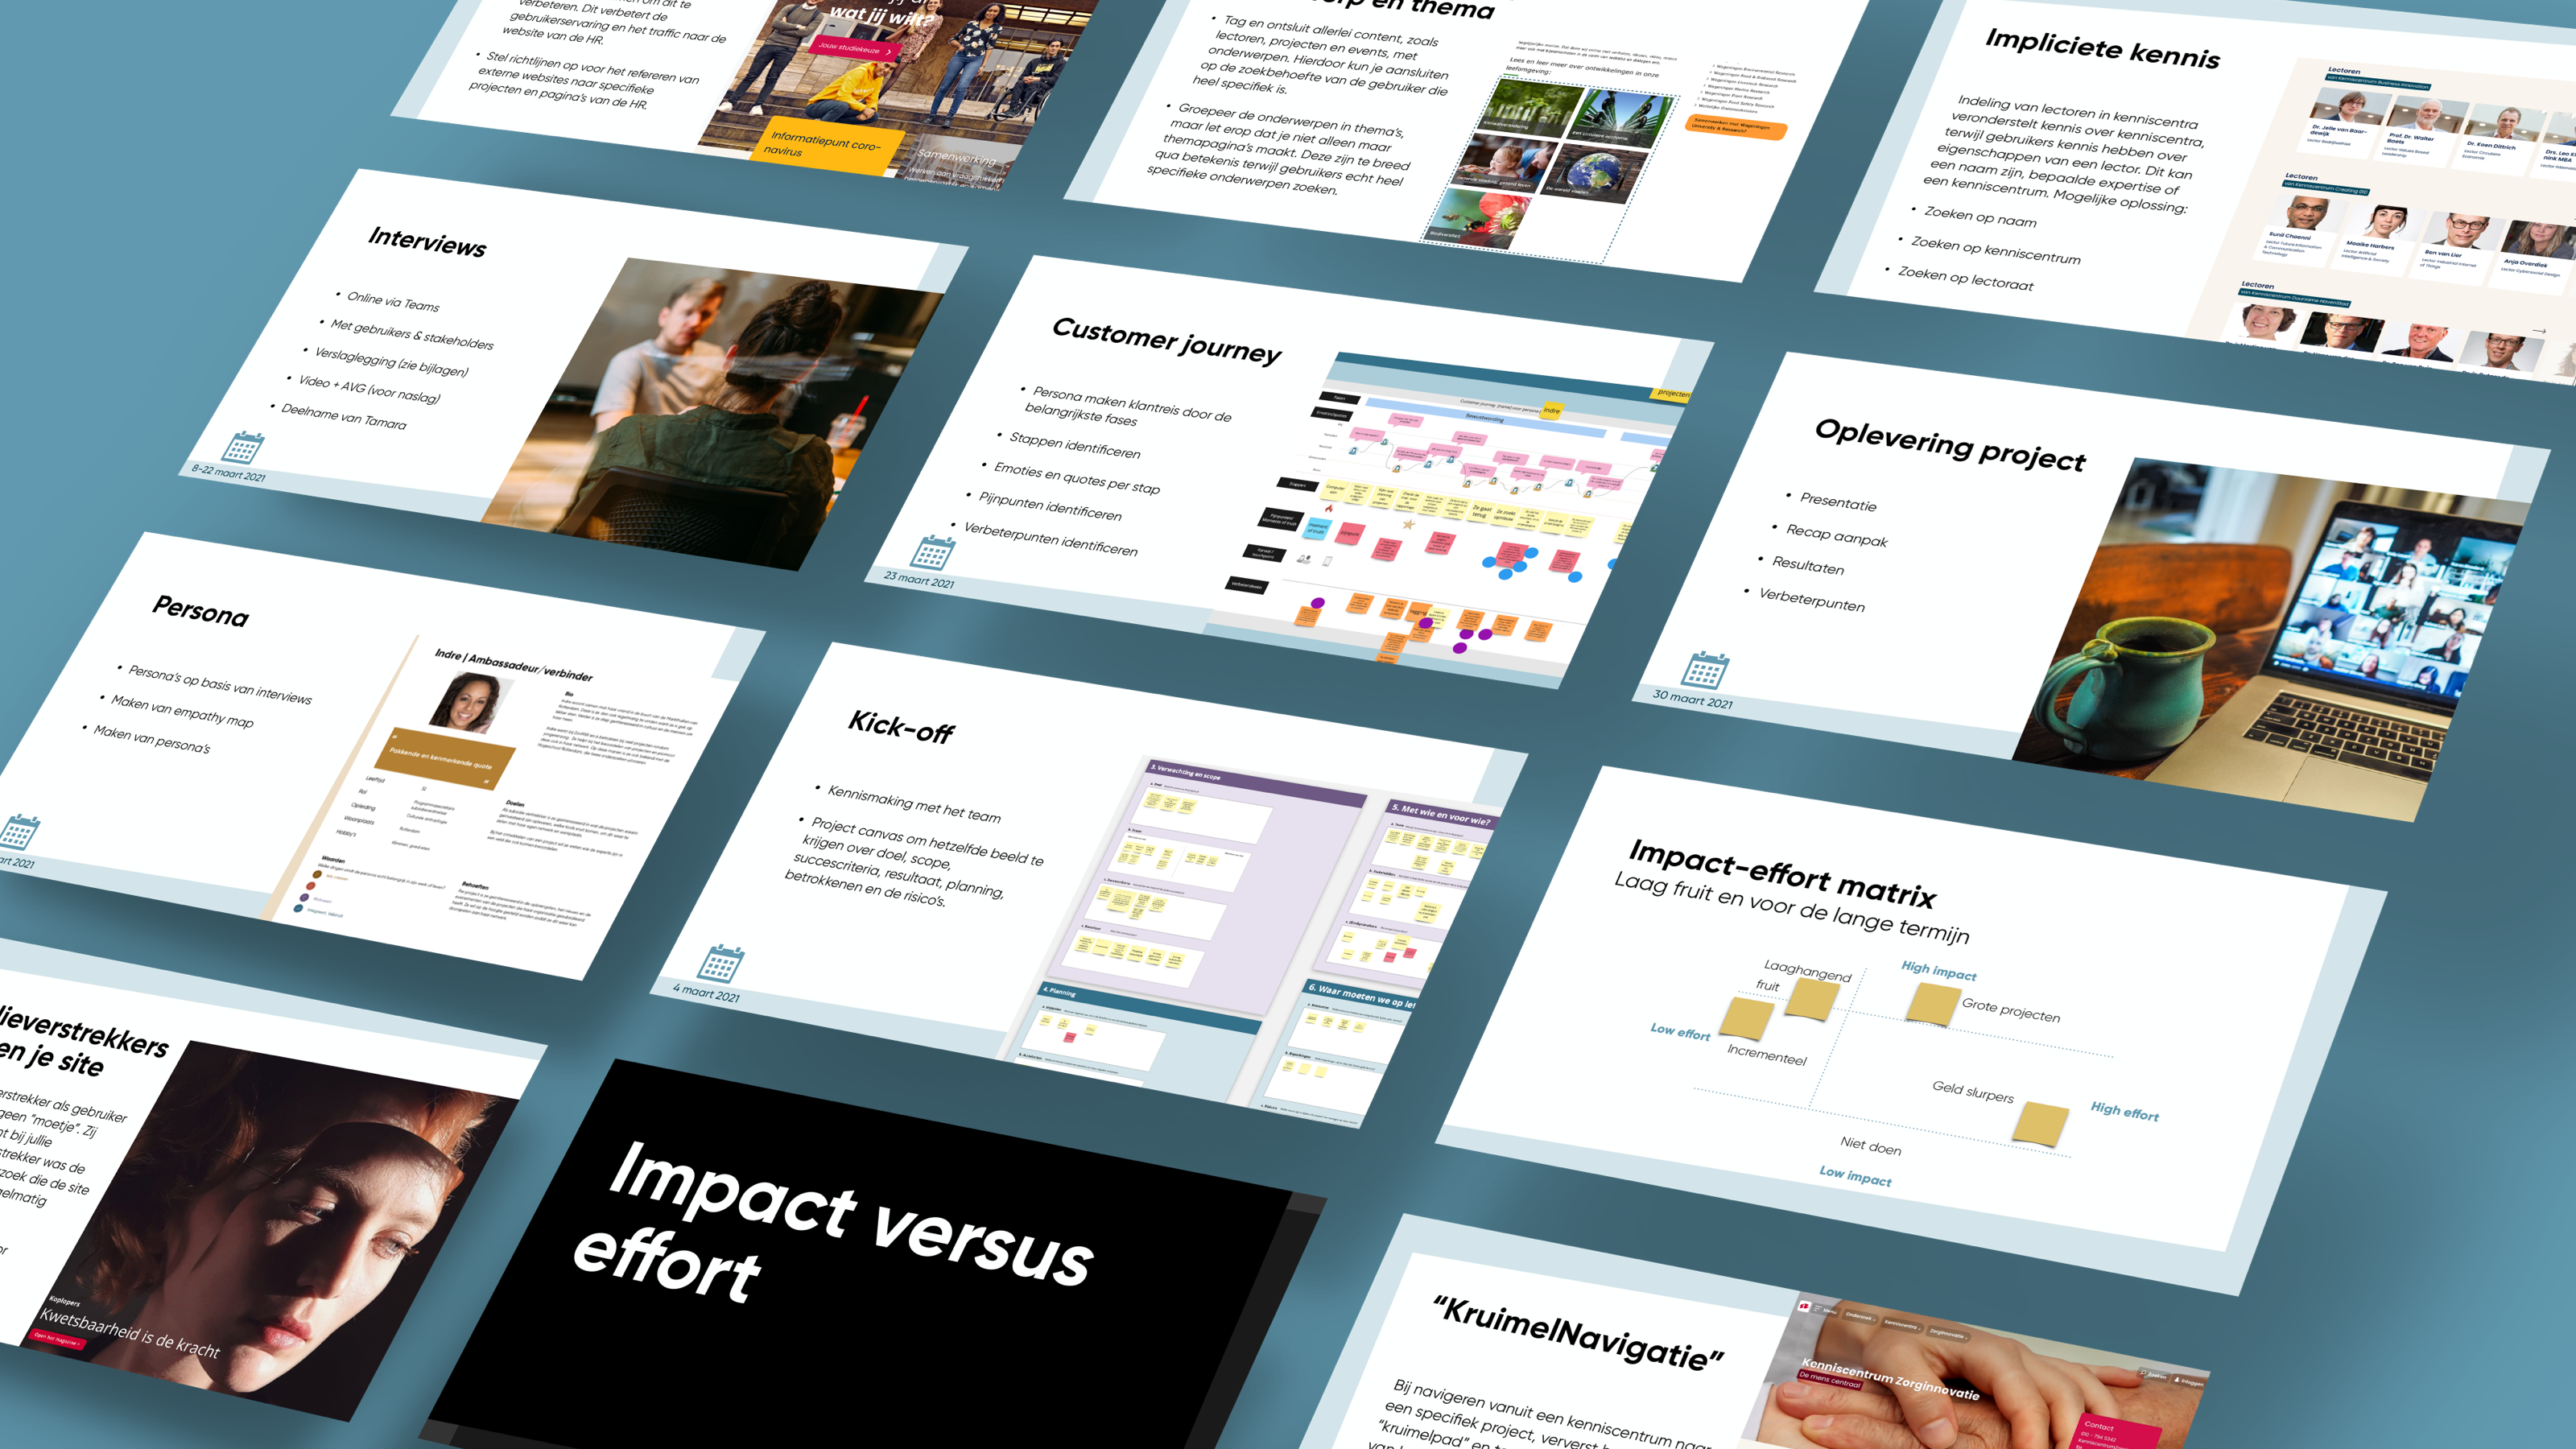 Improvements for website Rotterdam University of Applied Sciences